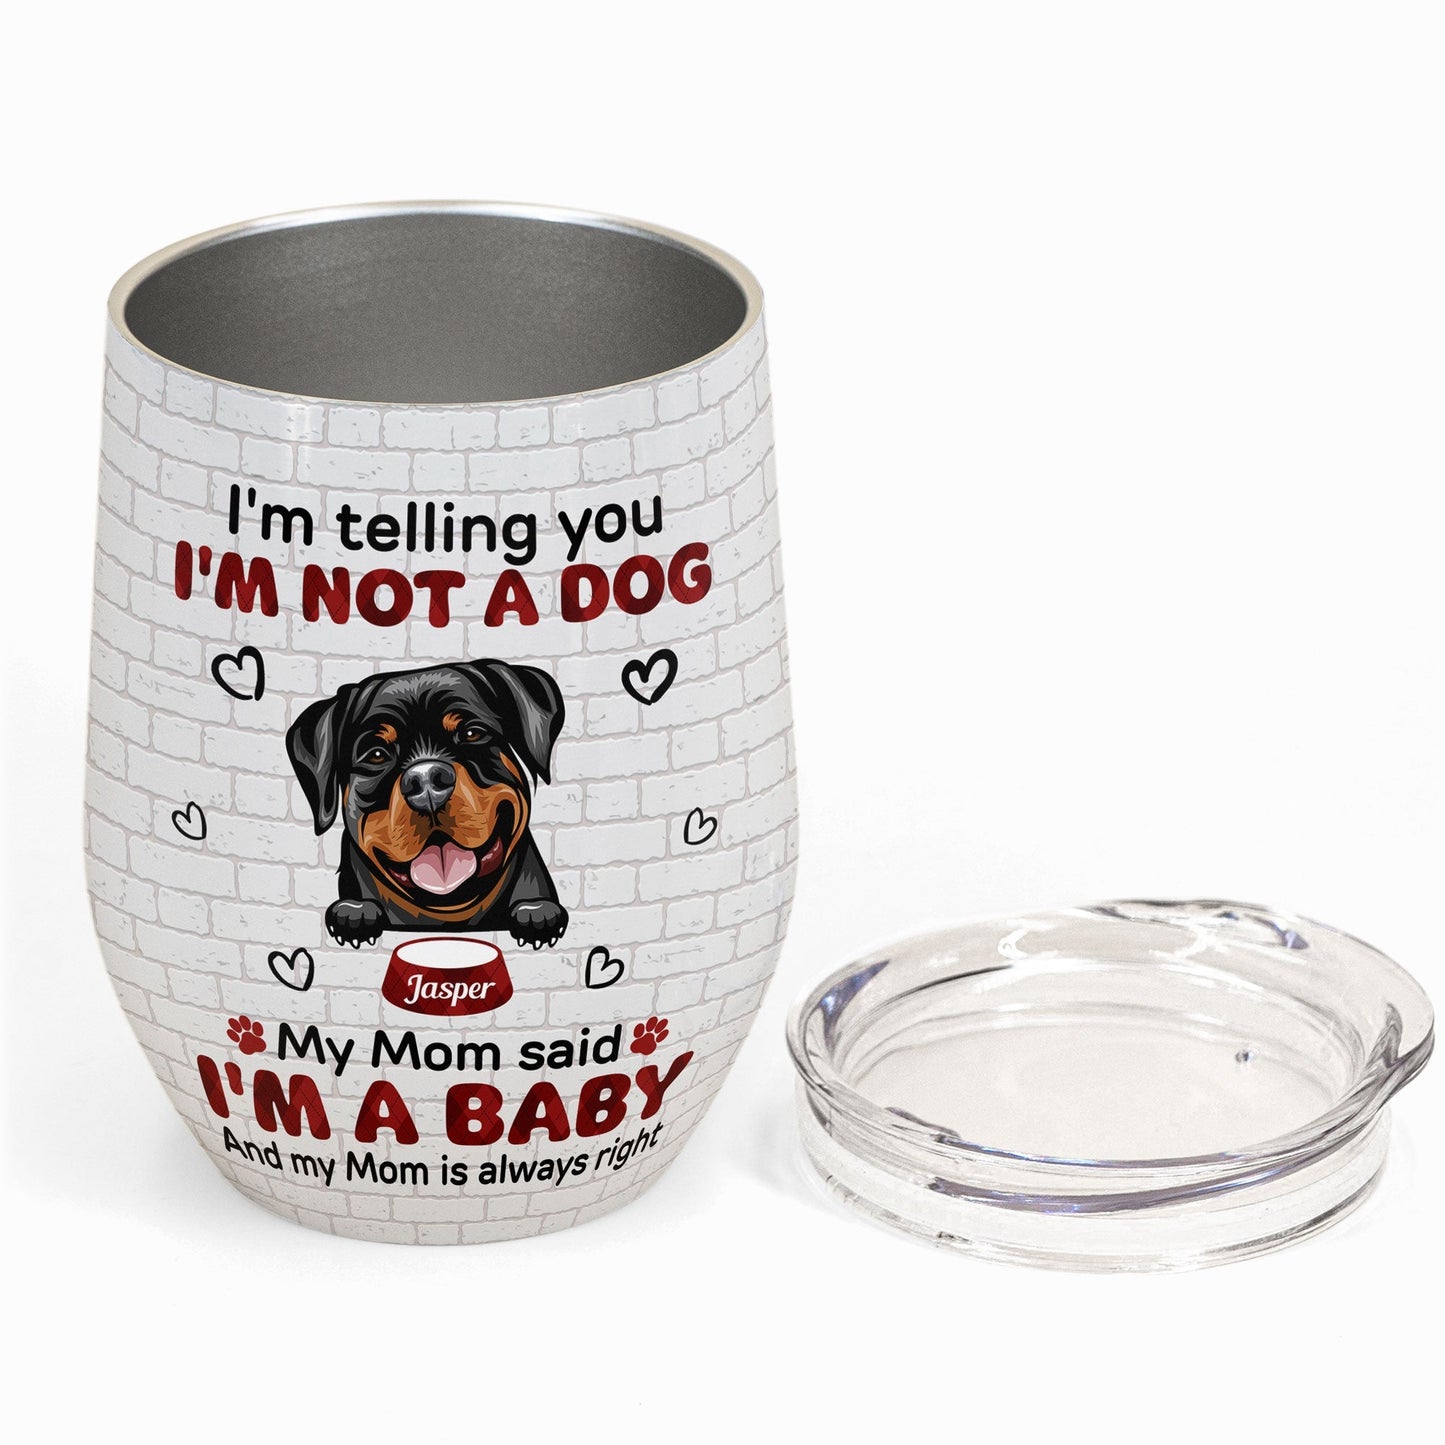 My Mom Said I'm A Baby - Personalized Wine Tumbler - Birthday, Loving Gift For Cat & Dog Lover, Pet Owner, Pet Mom, Pet Dad